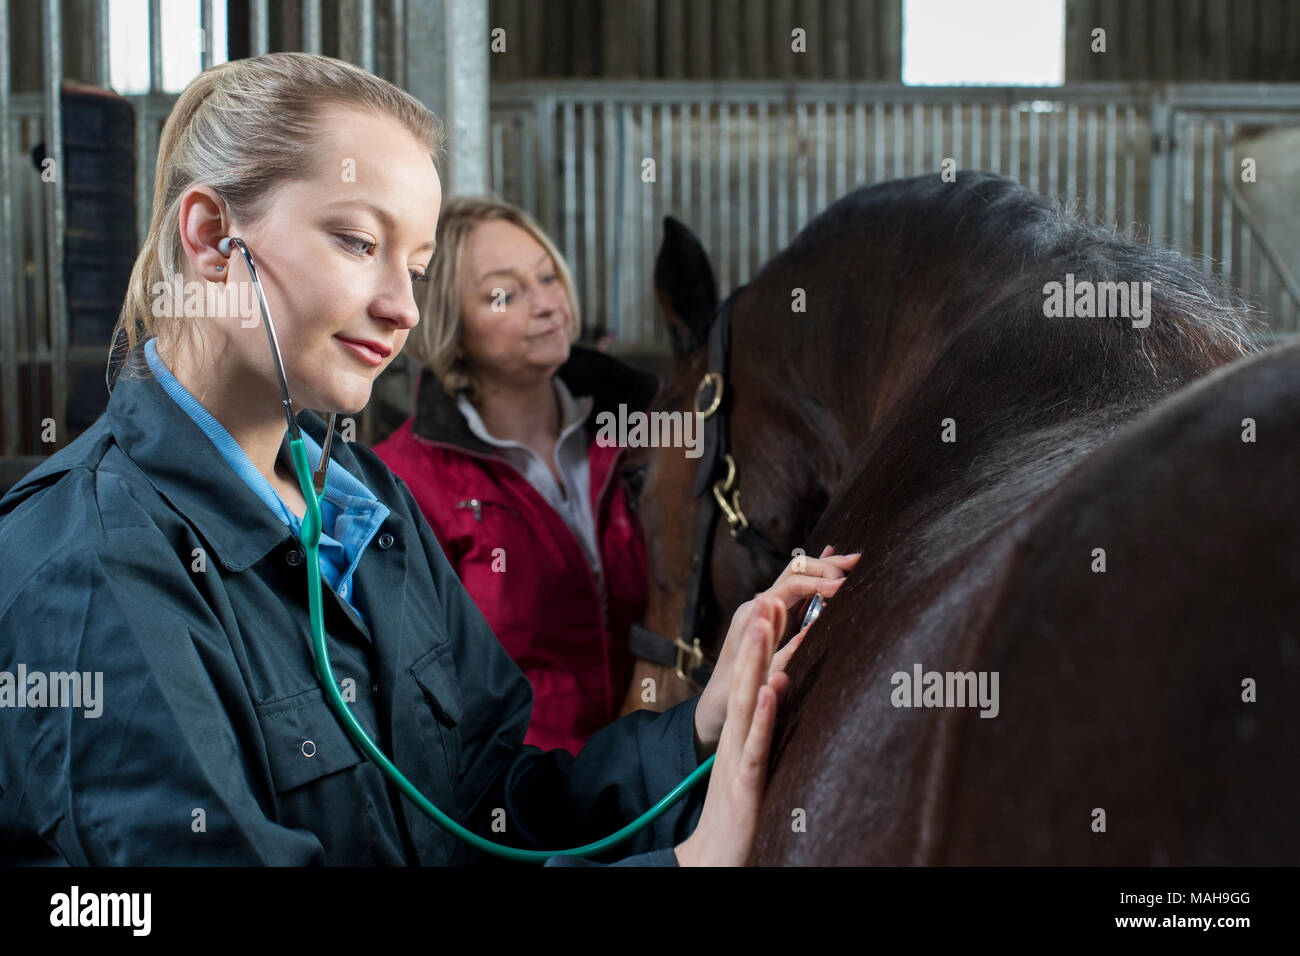 Female Vet Giving Medical Exam To Horse In Stable Stock Photo